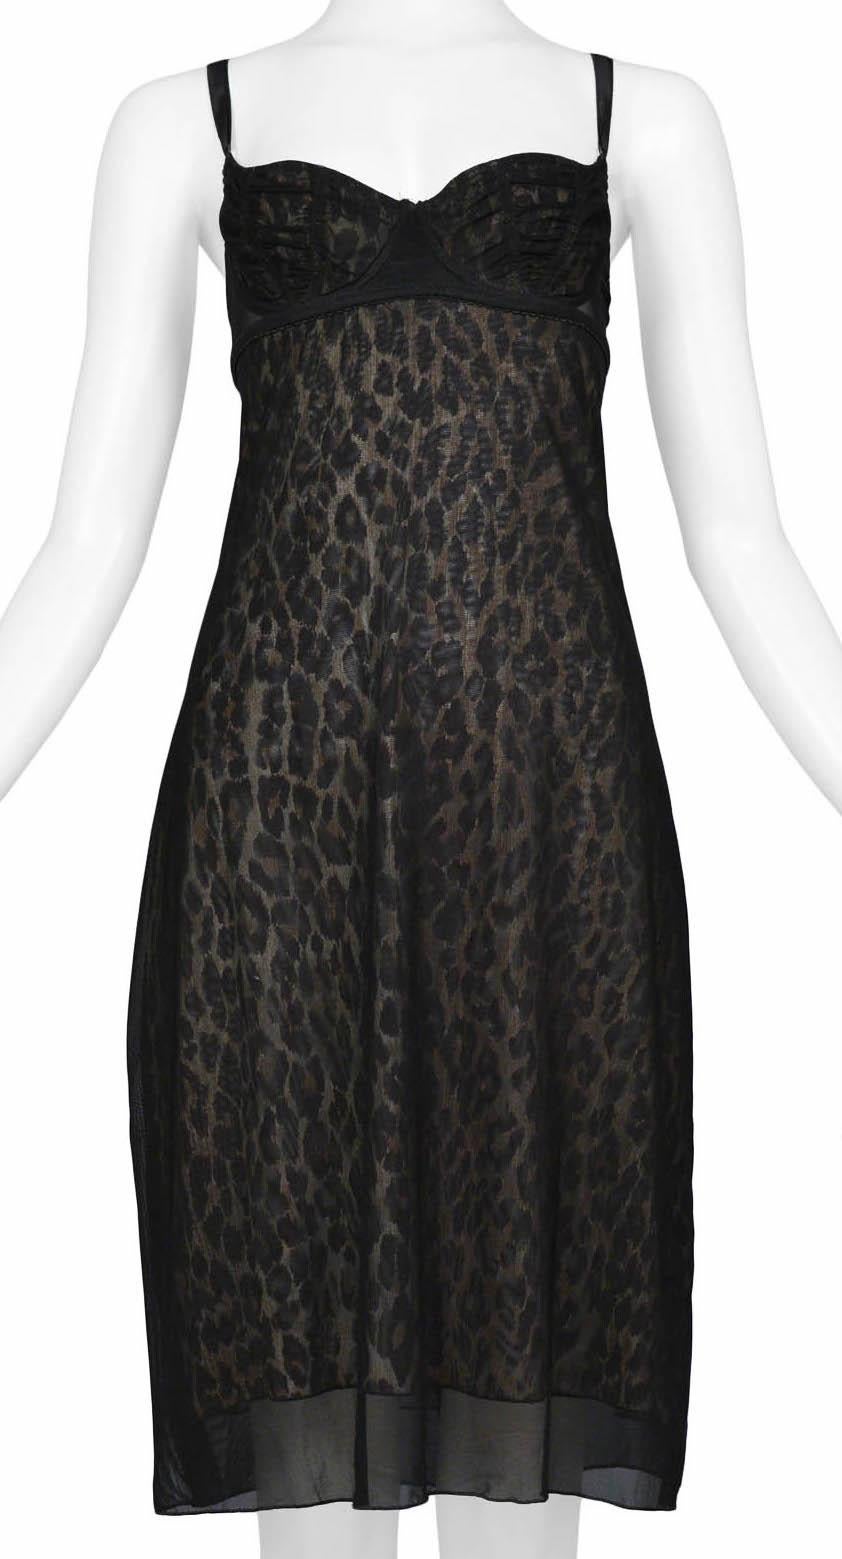 Resurrection Vintage is excited to offer a vintage Dolce & Gabbana black sheer dress featuring a leopard print underlay, inset bustier bra, sheering on the cups, and adjustable straps.

Dolce & Gabbana
Size: 42
75% Polyamide 25% Elastine
Excellent